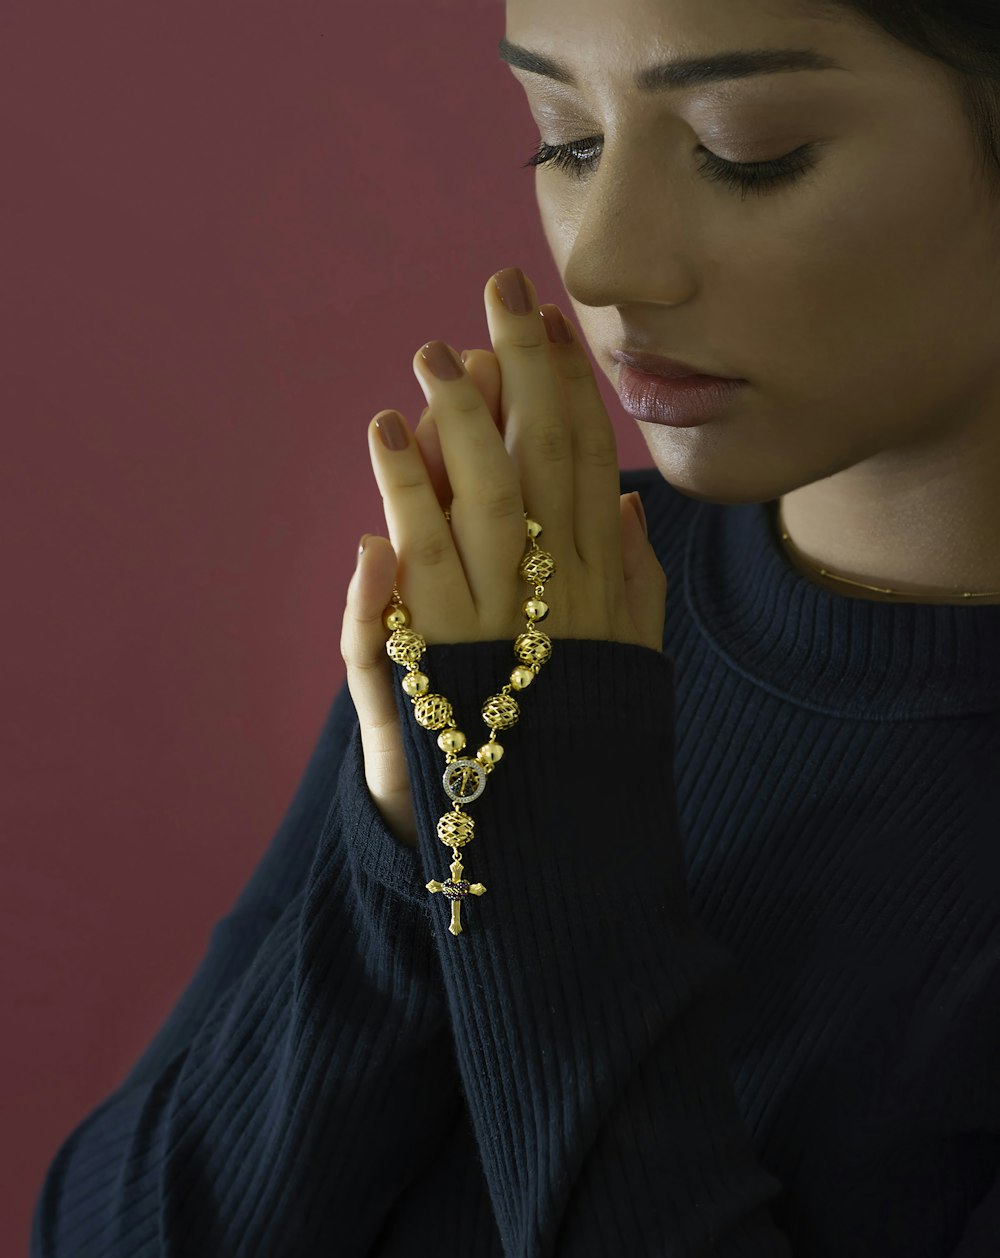 woman in black turtleneck sweater wearing gold necklace